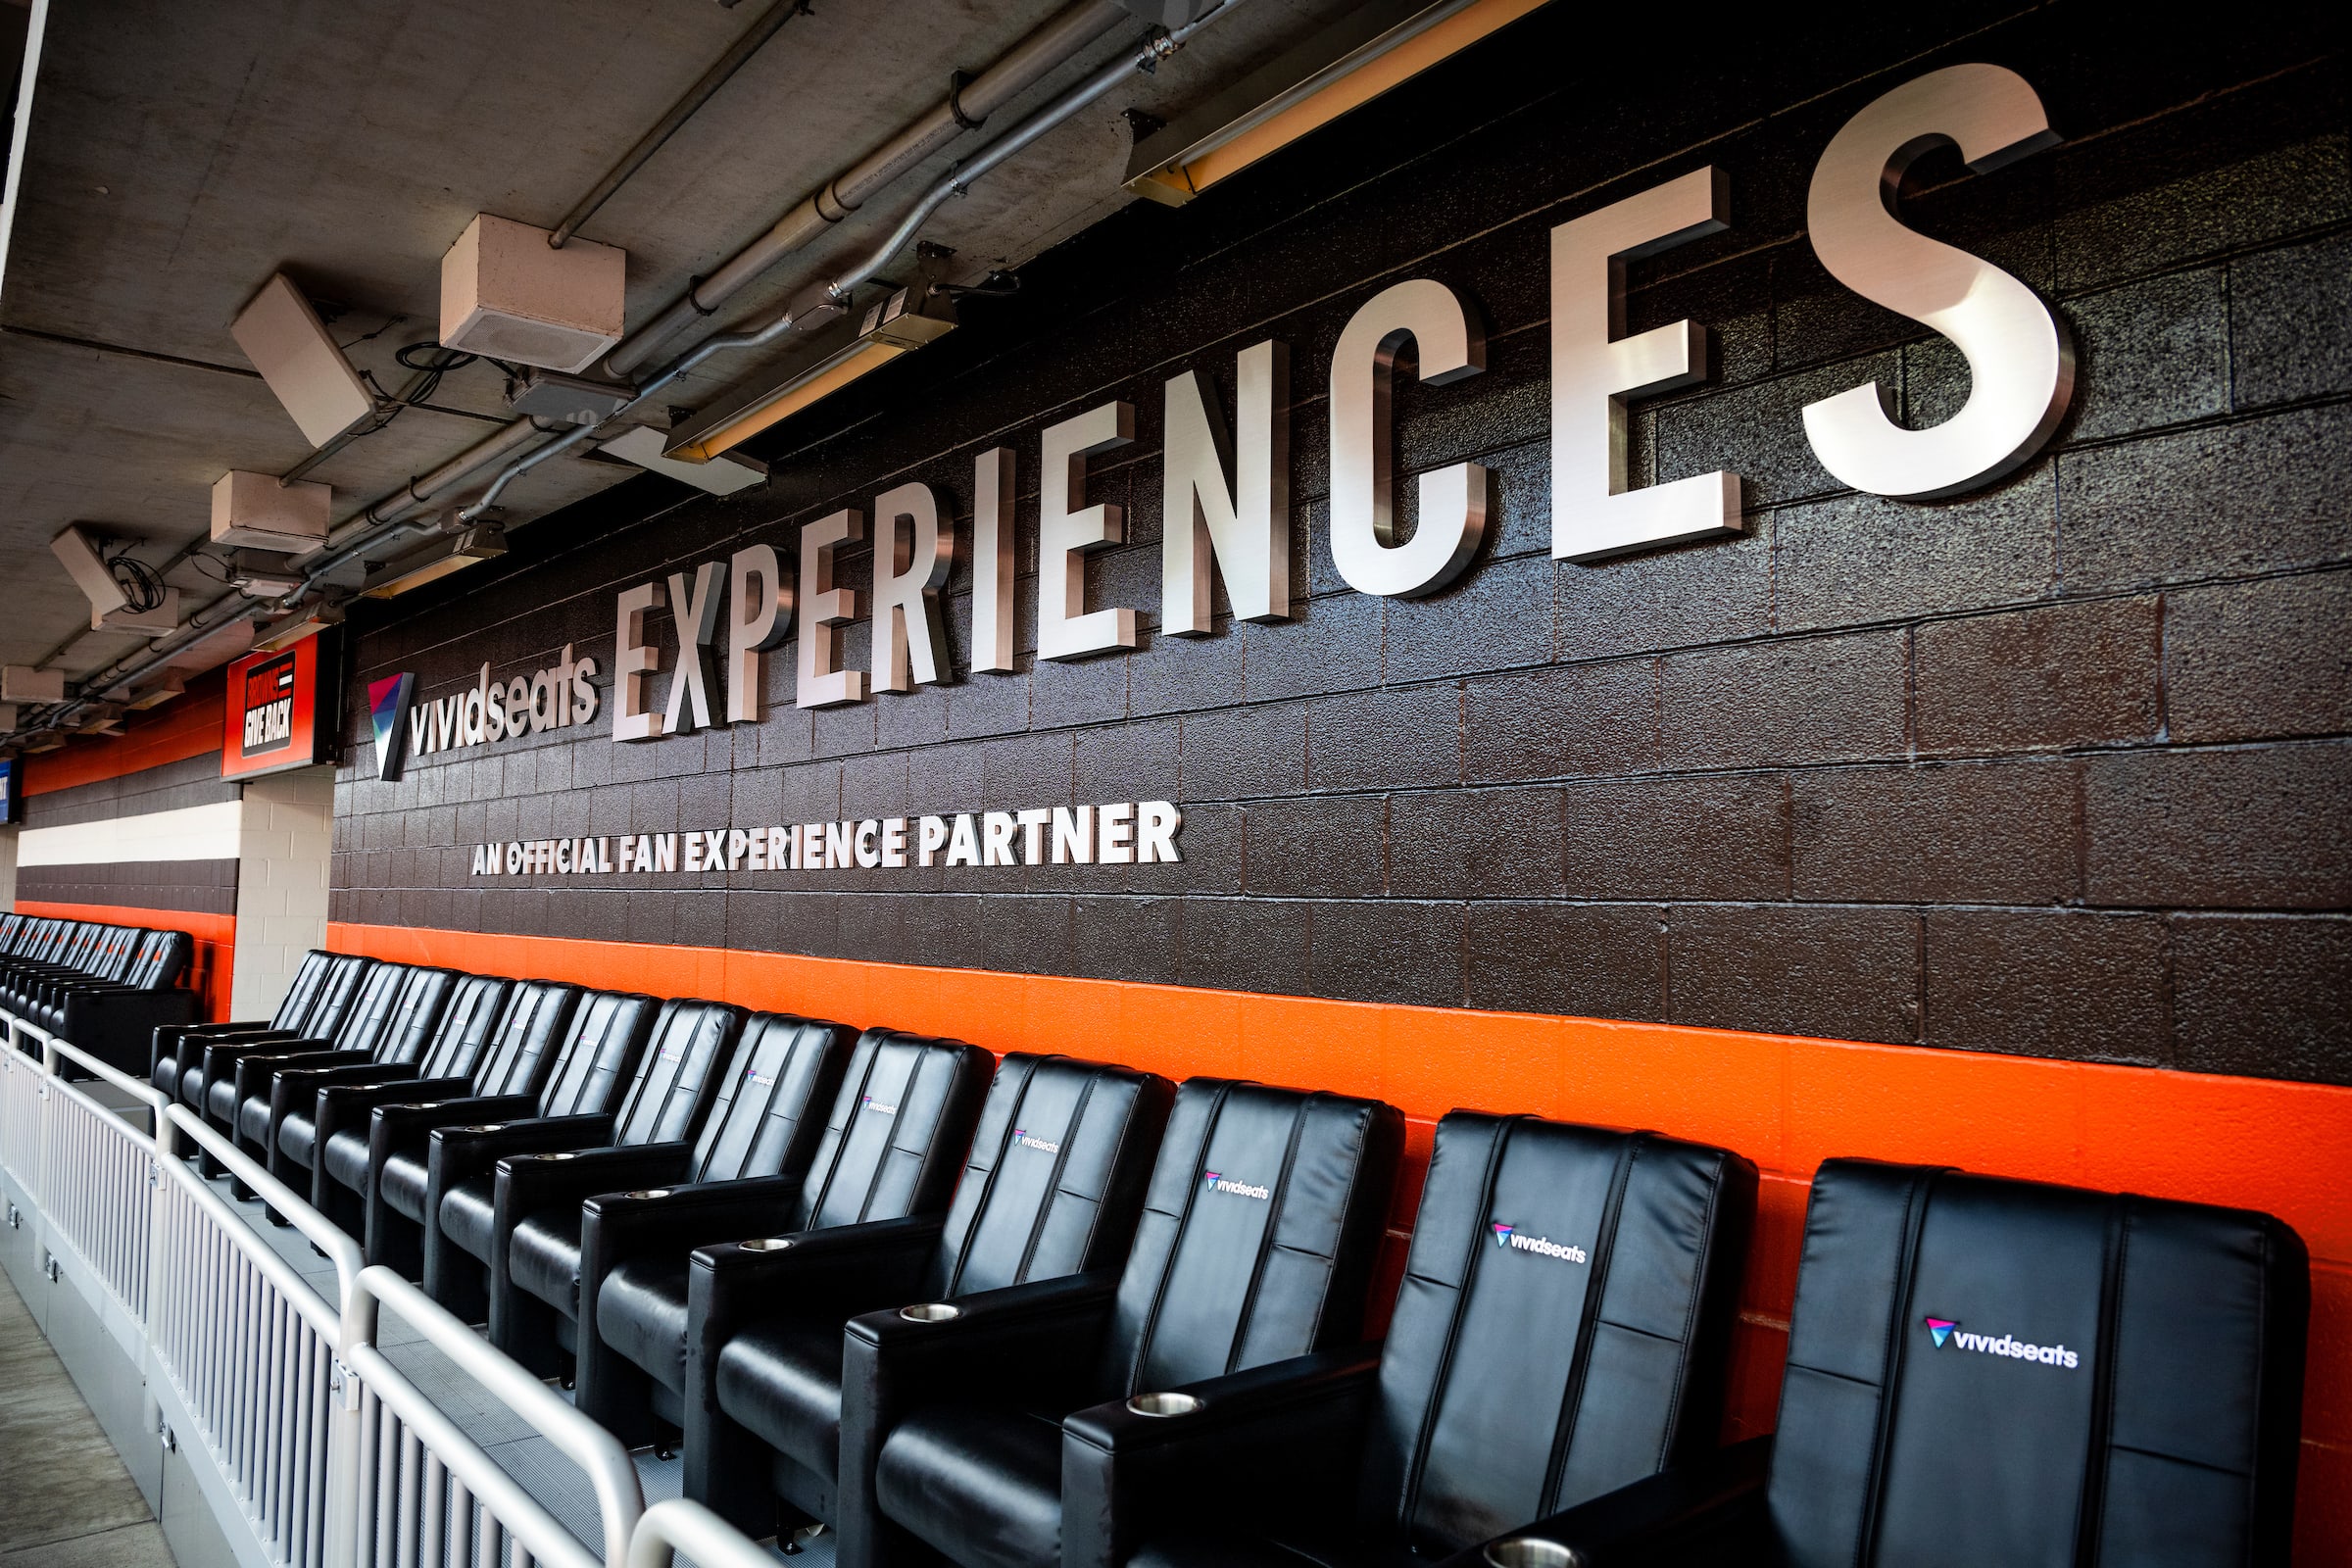 Cleveland Browns Official Fan Experience Packages Tickets